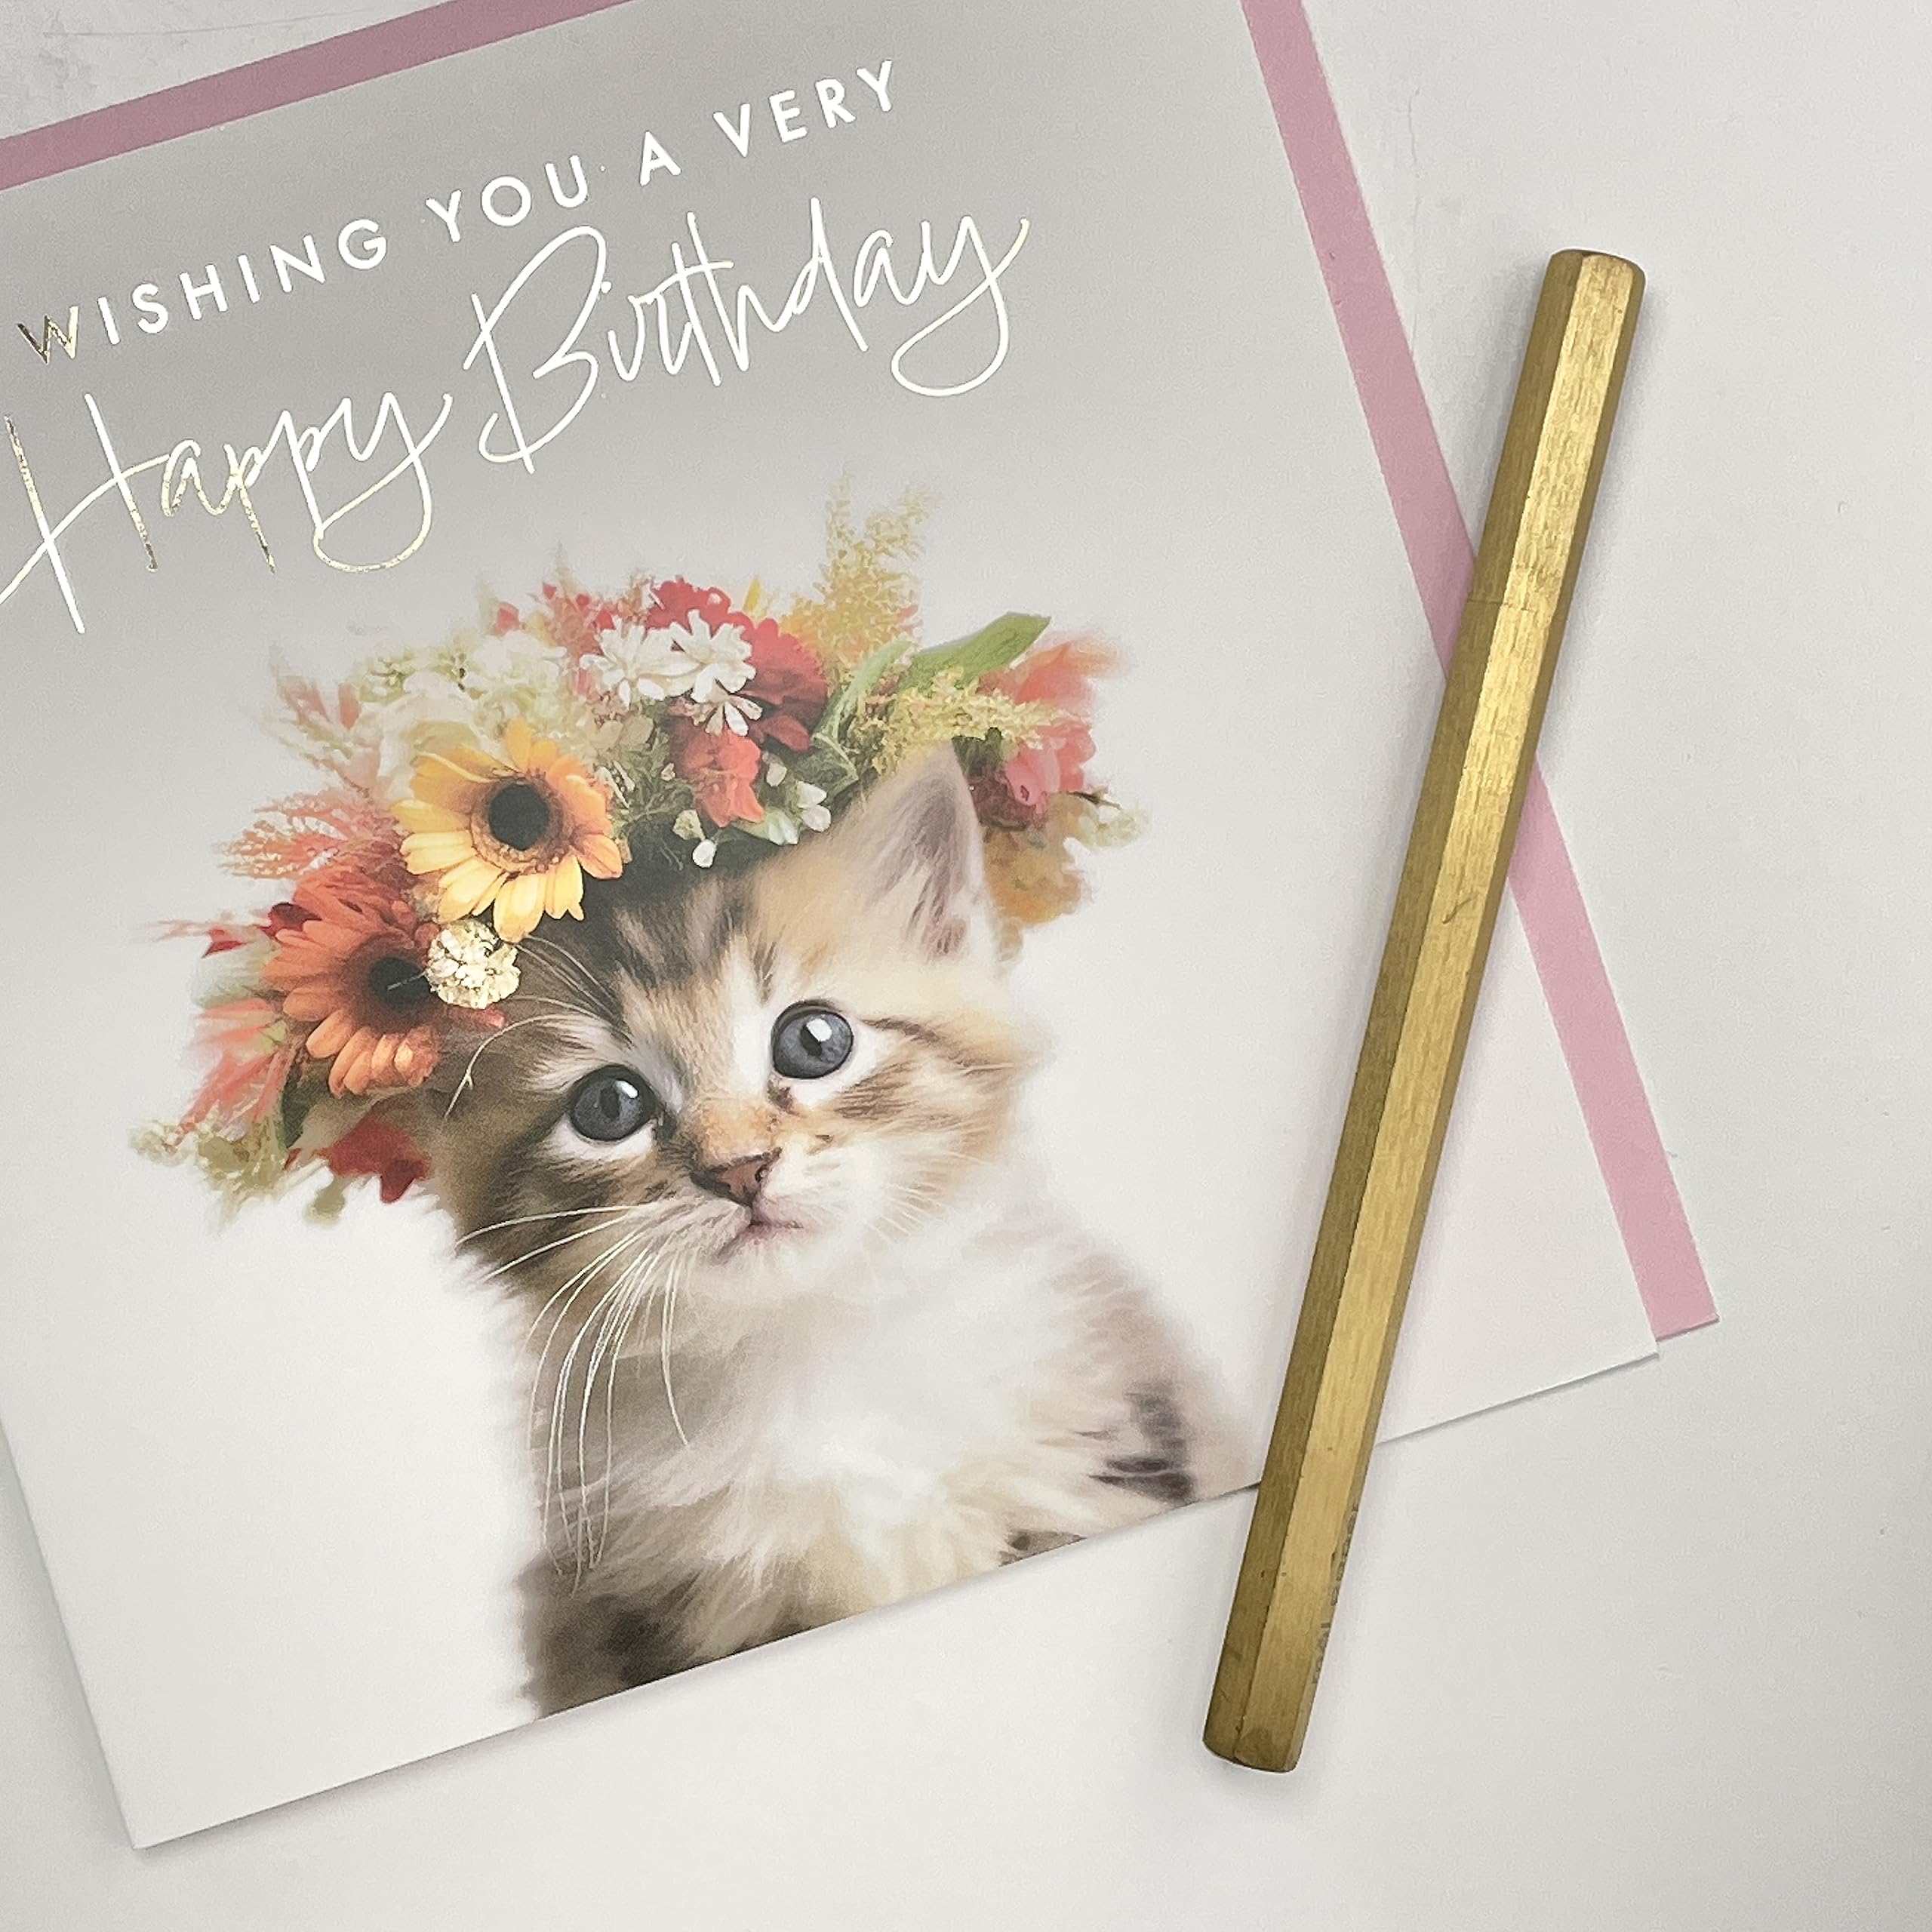 Old English Co. Baby Kitten Very Happy Birthday Card for Her - Cute Kitten Floral Birthday Card for Women - Cute Birthday Cards for Sister, Mum, Daughter, Friend   Blank Inside with Envelope…